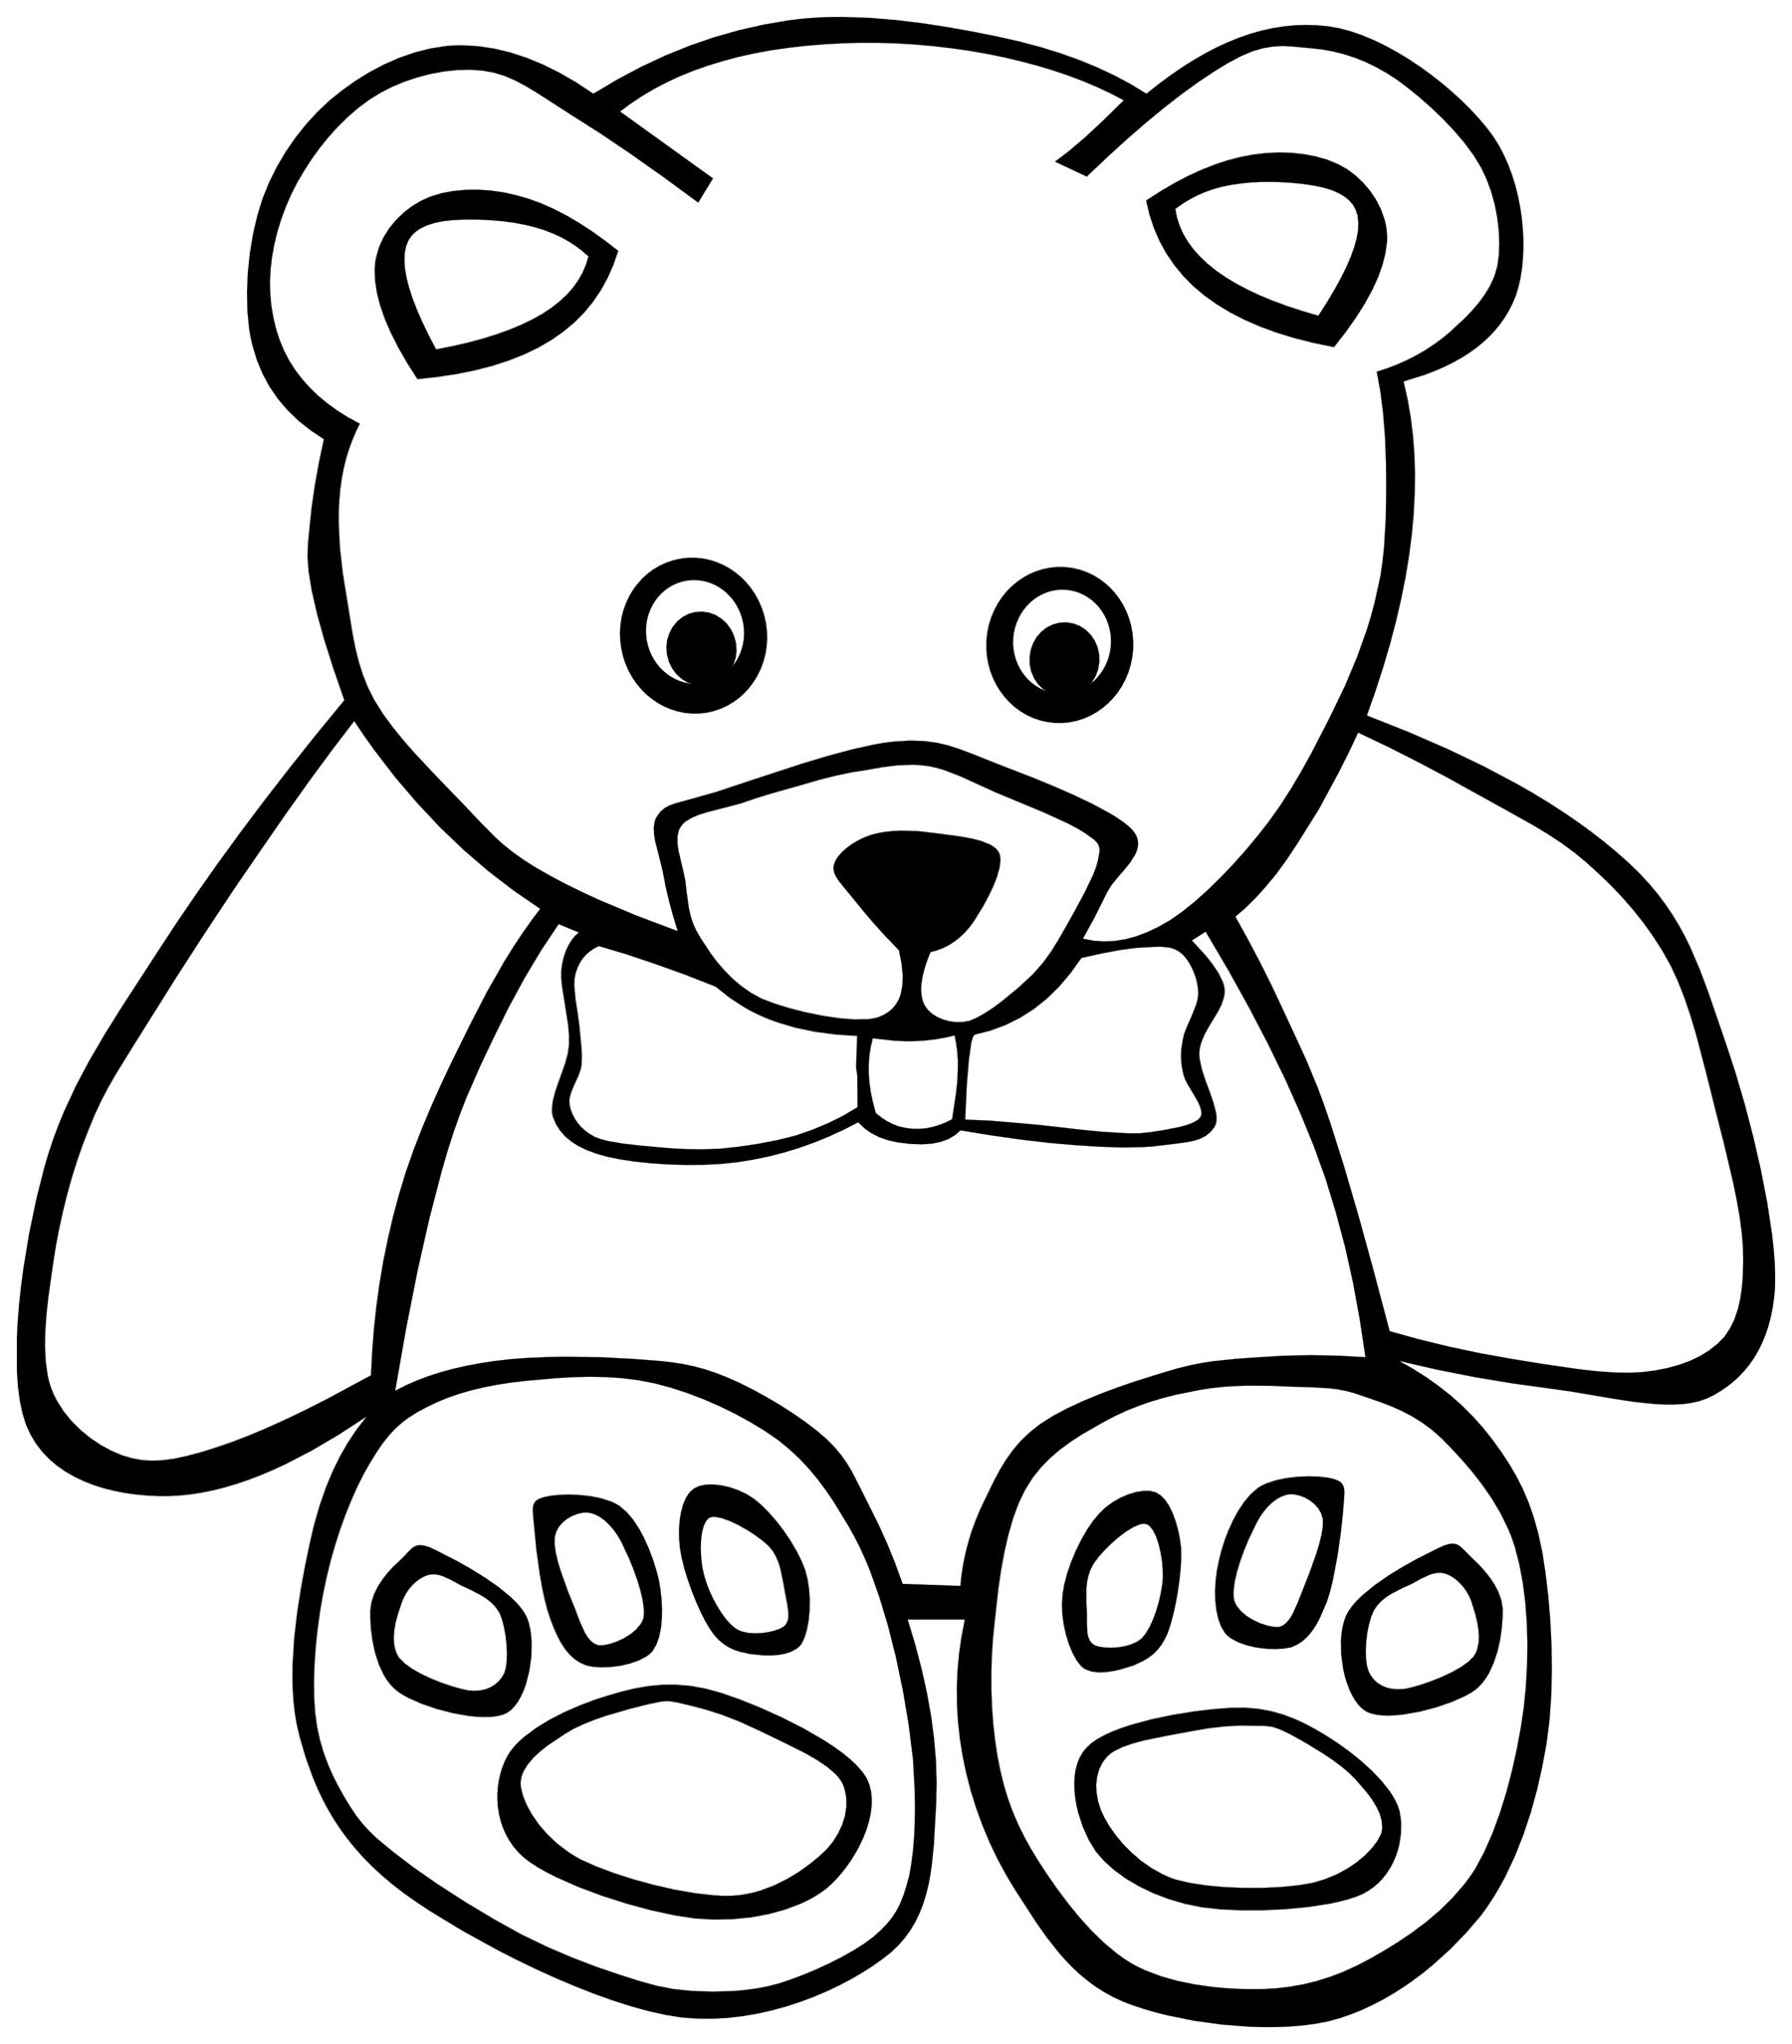 Bears for children - Bears Kids Coloring Pages